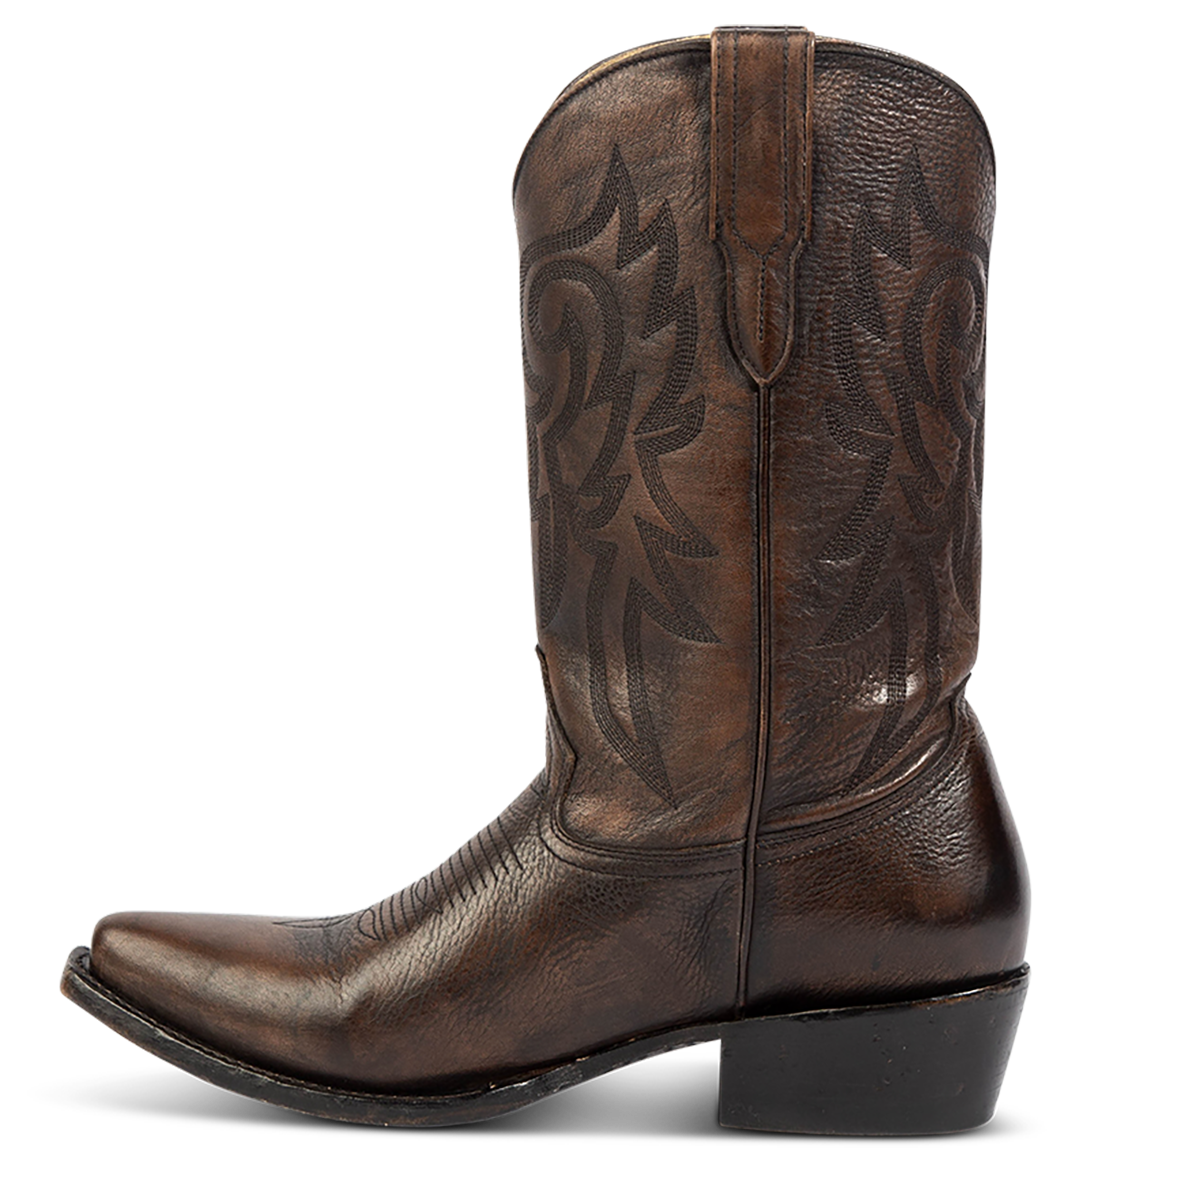 Inside view showing FREEBIRD men's Marshall black distressed leather western cowboy boot with shaft stitch detailing, snip toe construction and leather pull straps